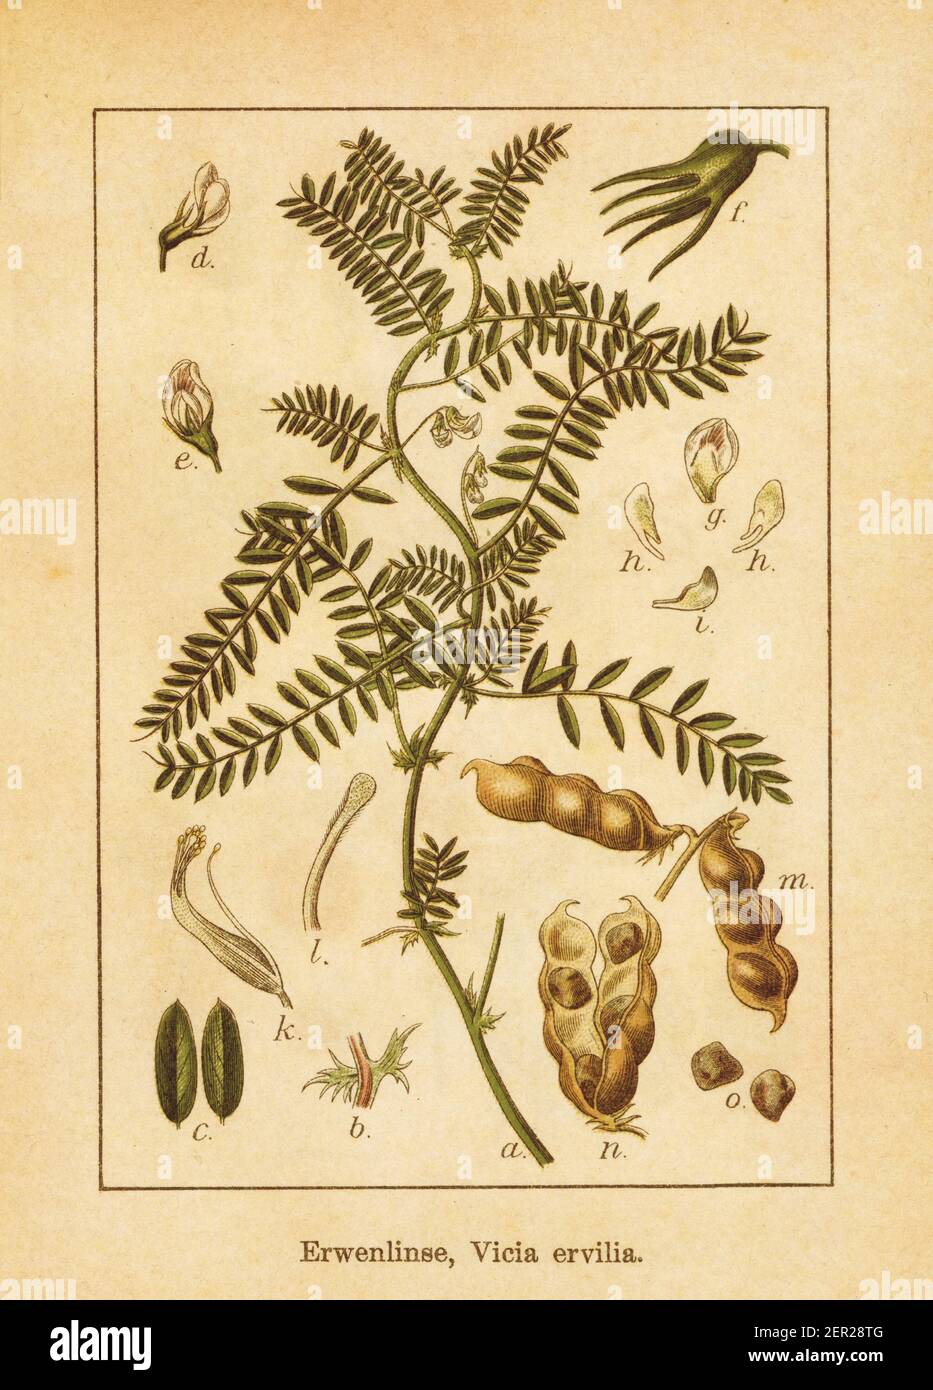 Antique illustration of a vicia ervilia, also known as bitter vetch or blister vetch. Engraved by Jacob Sturm (1771-1848) and published in the book De Stock Photo